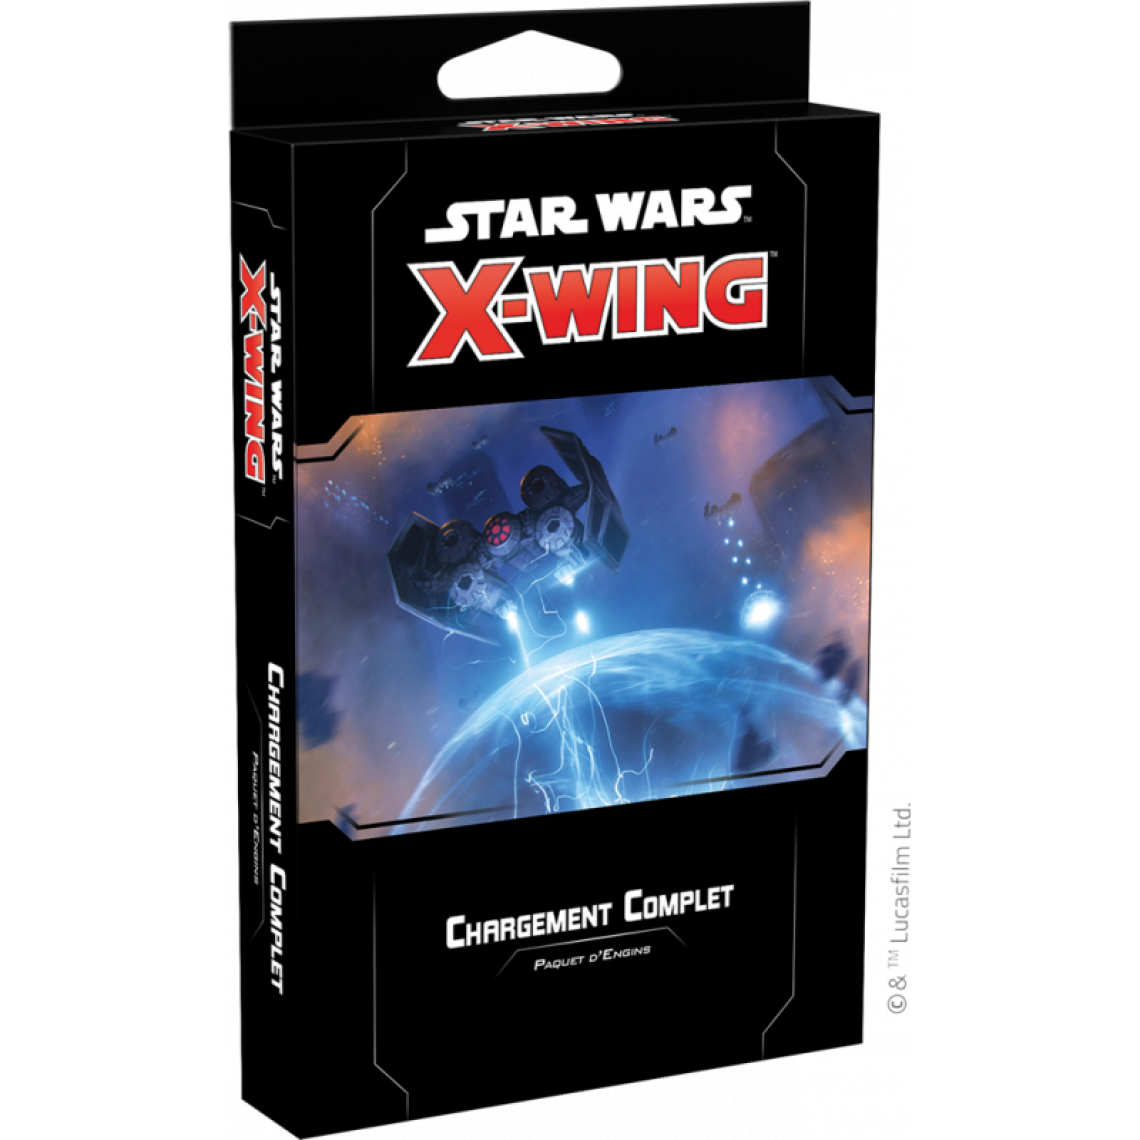 Ac-Deco - Star Wars X-Wing 2.0 - Chargement Complet (Extension Engins) - Statues